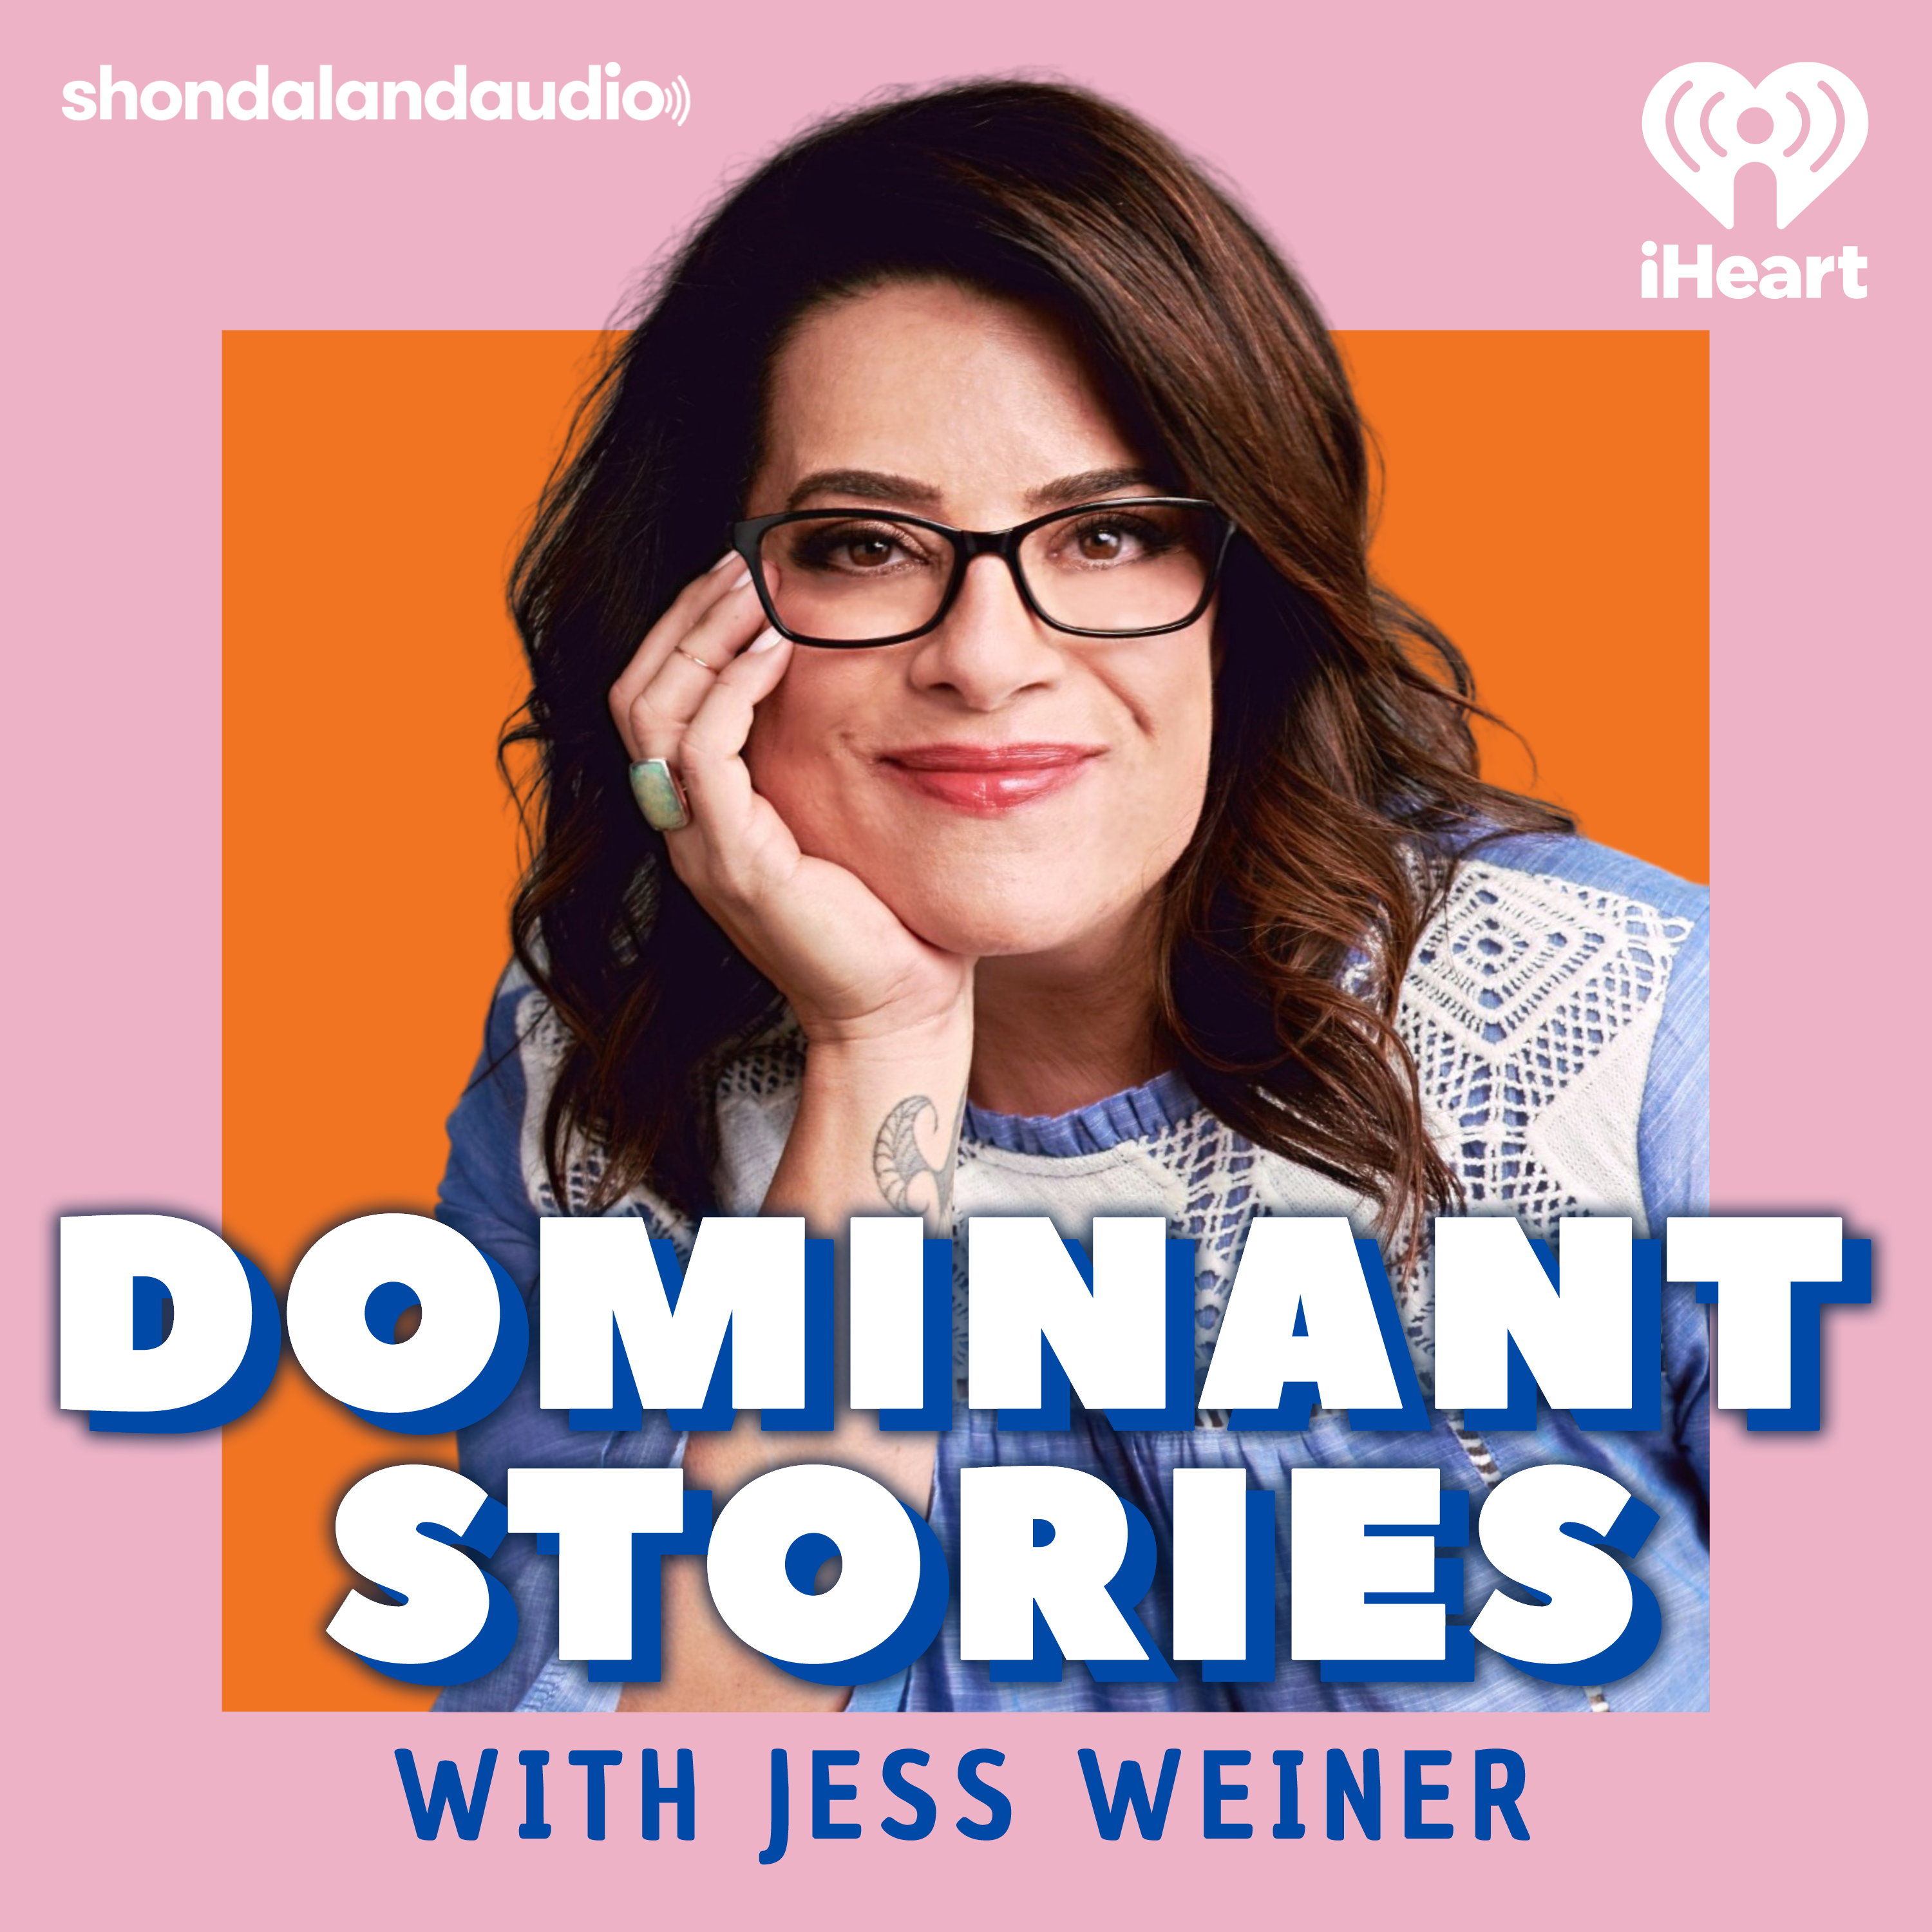 Introducing Dominant Stories with Jess Weiner